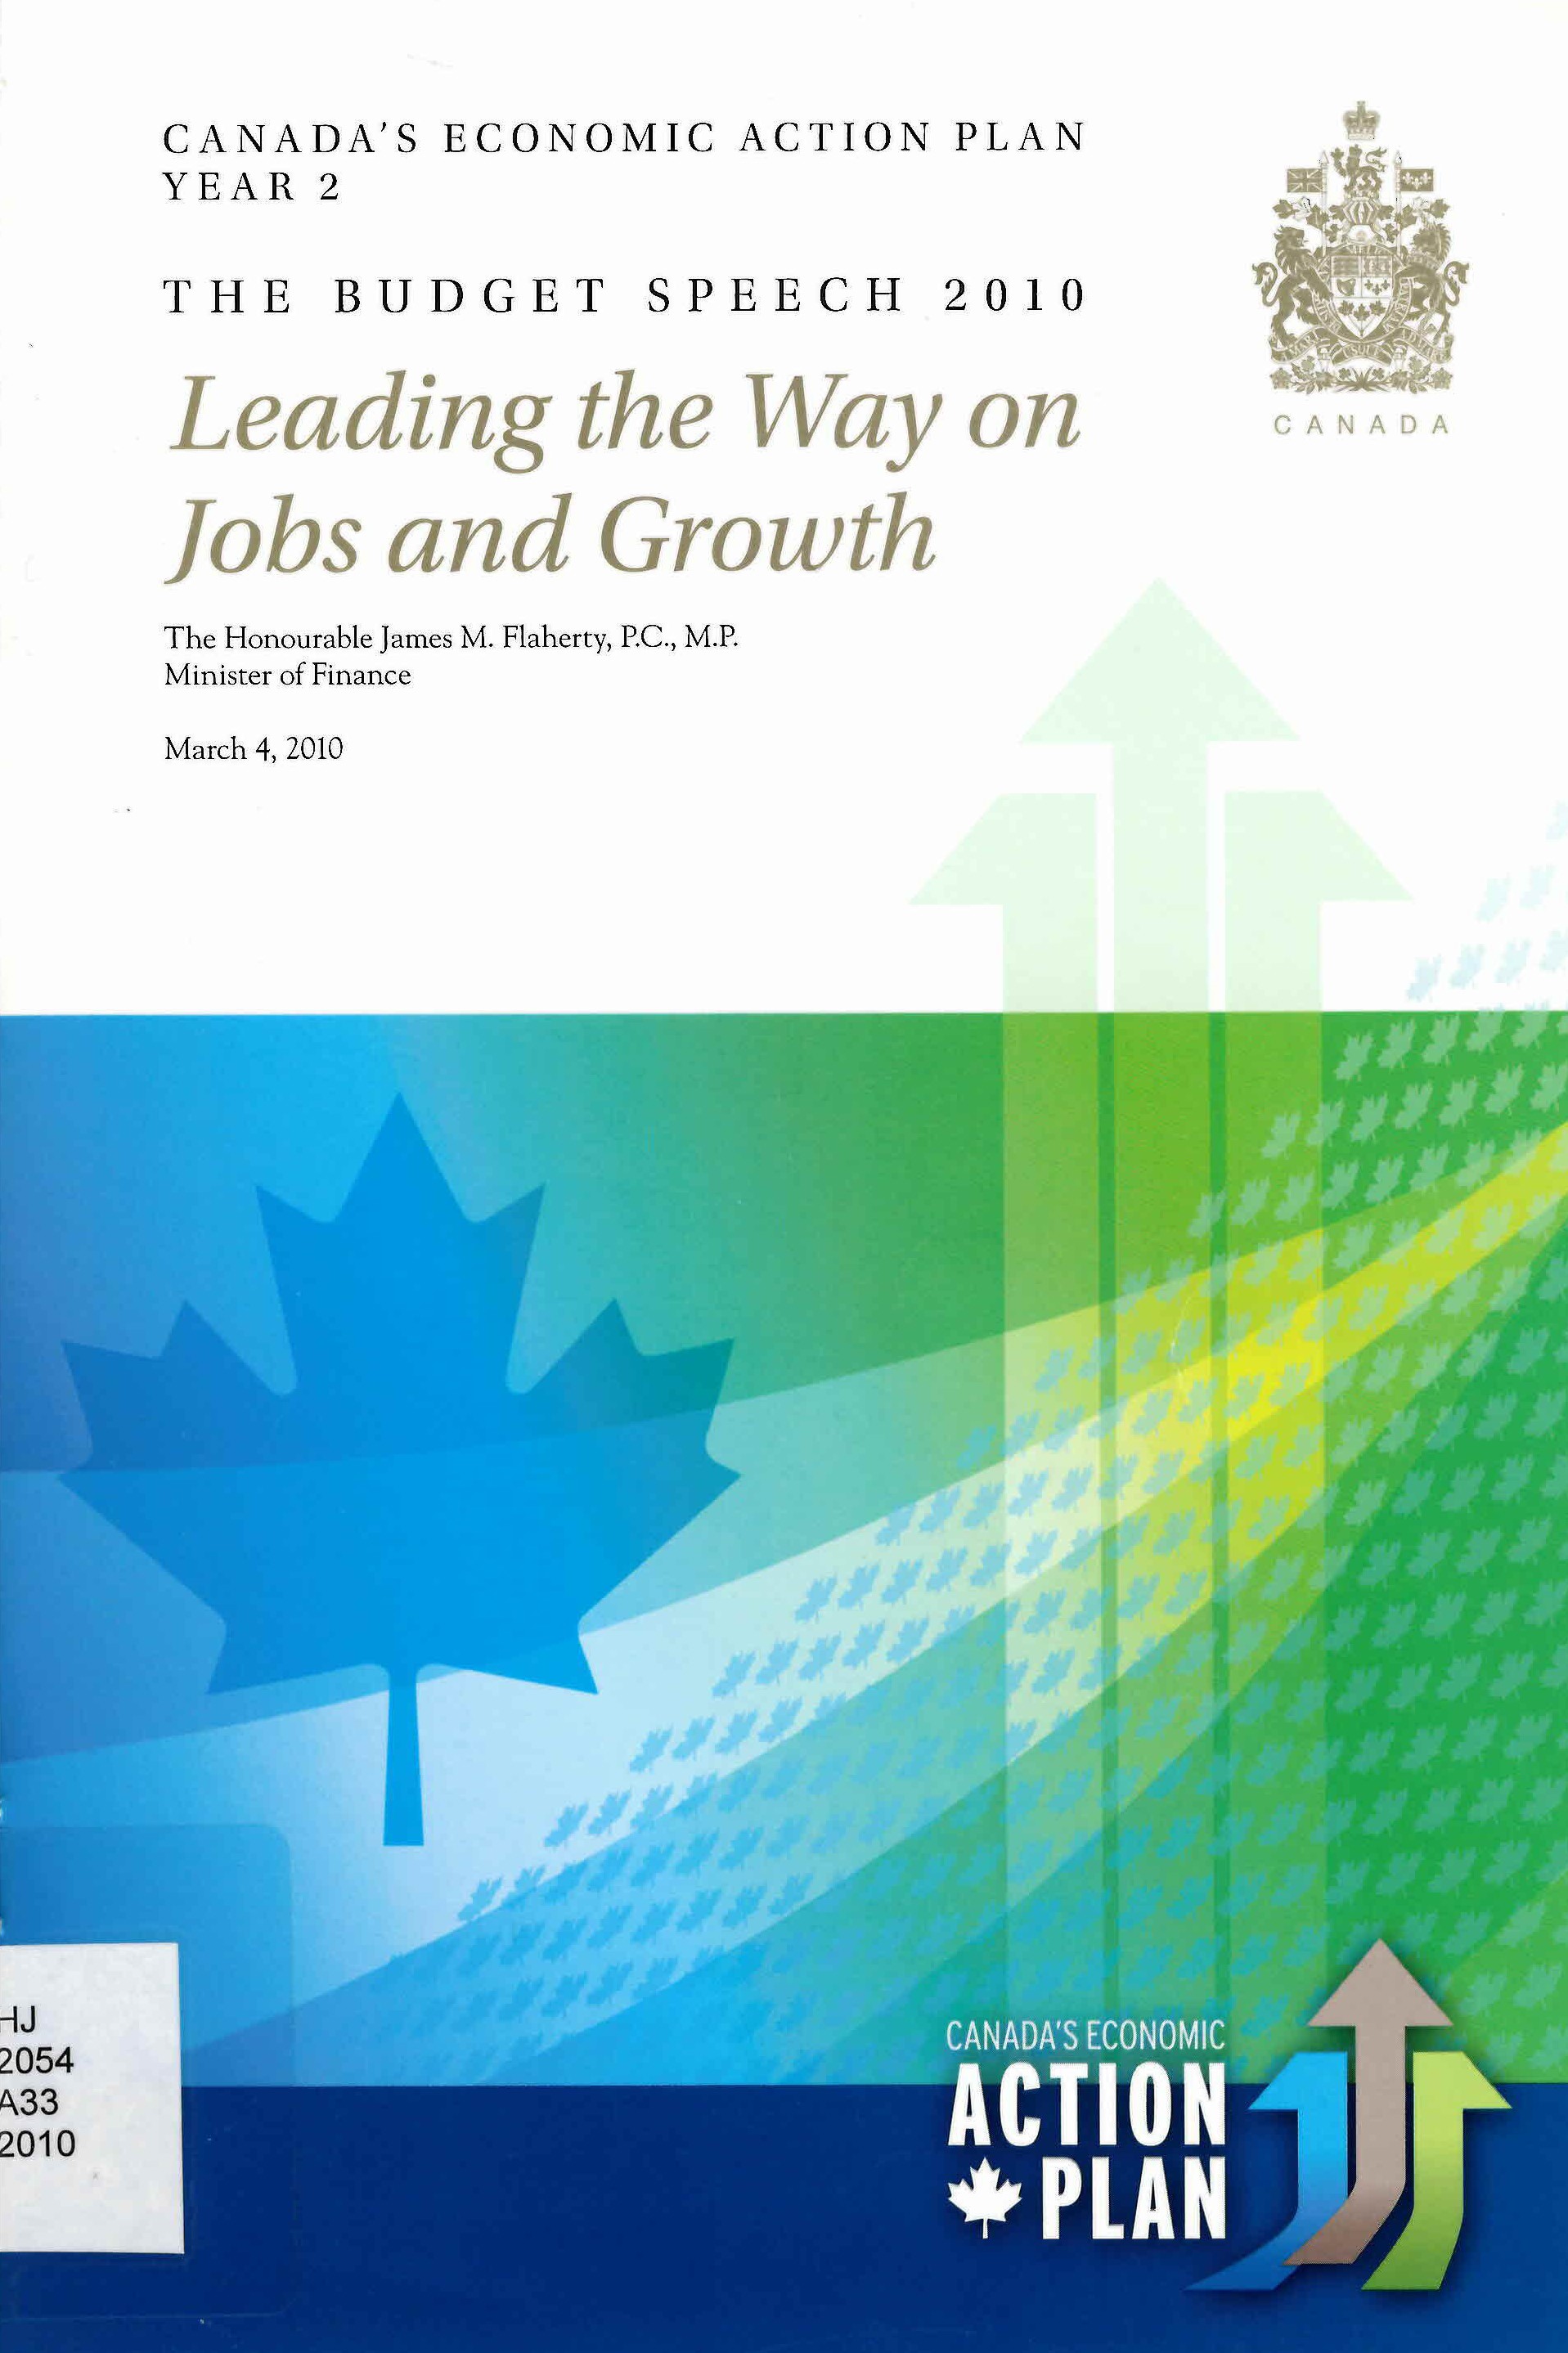 Canada's economic action plan, year 2 : the budget speech 2010 : leading the way on jobs and growth